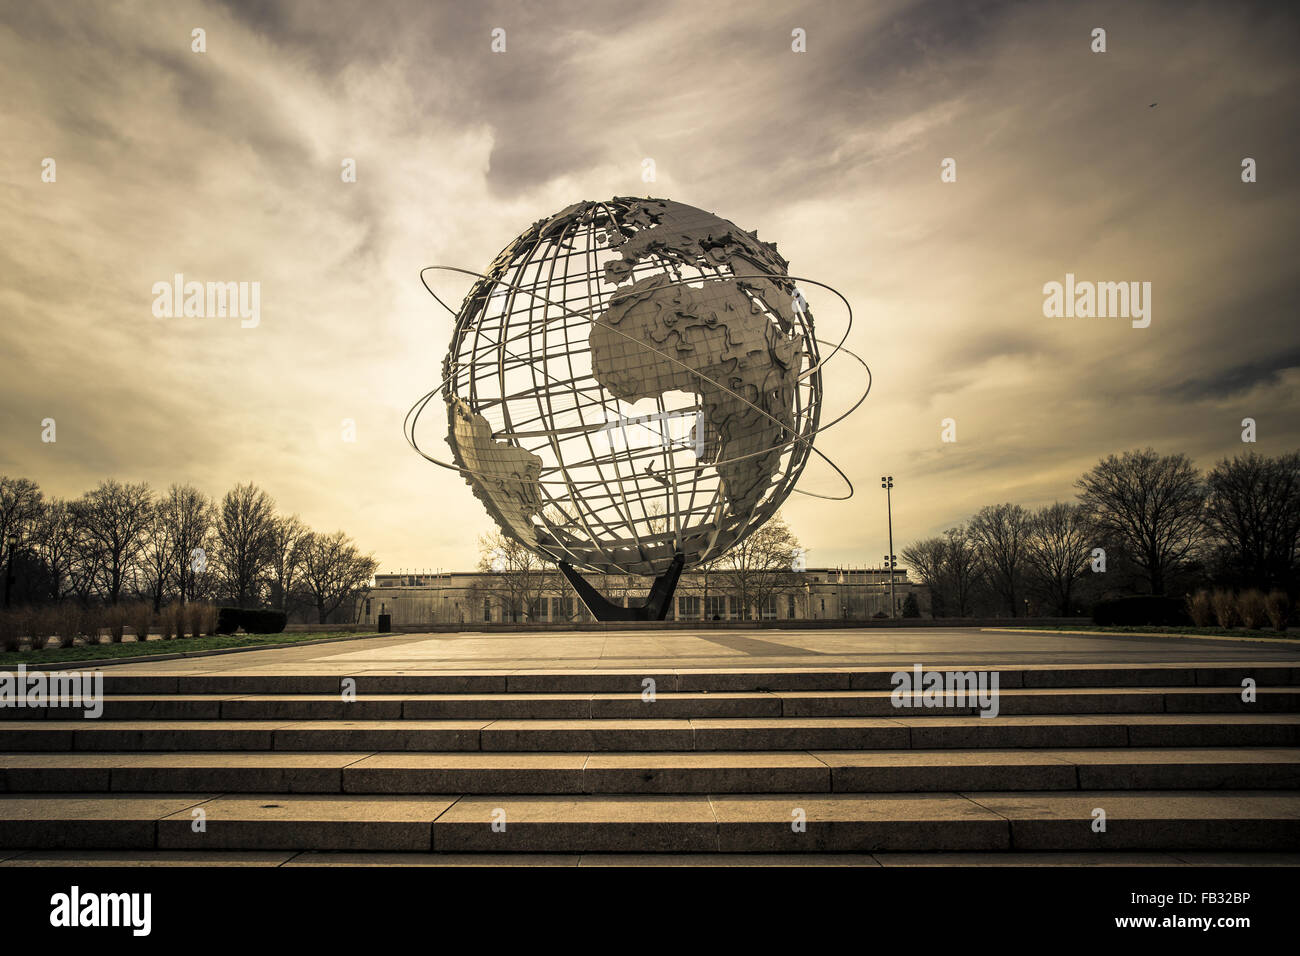 Historic Worlds Fair Unisphere globe in Flushing Meadows Corona Park in Queens, New York City with retro vintage filter effect Stock Photo